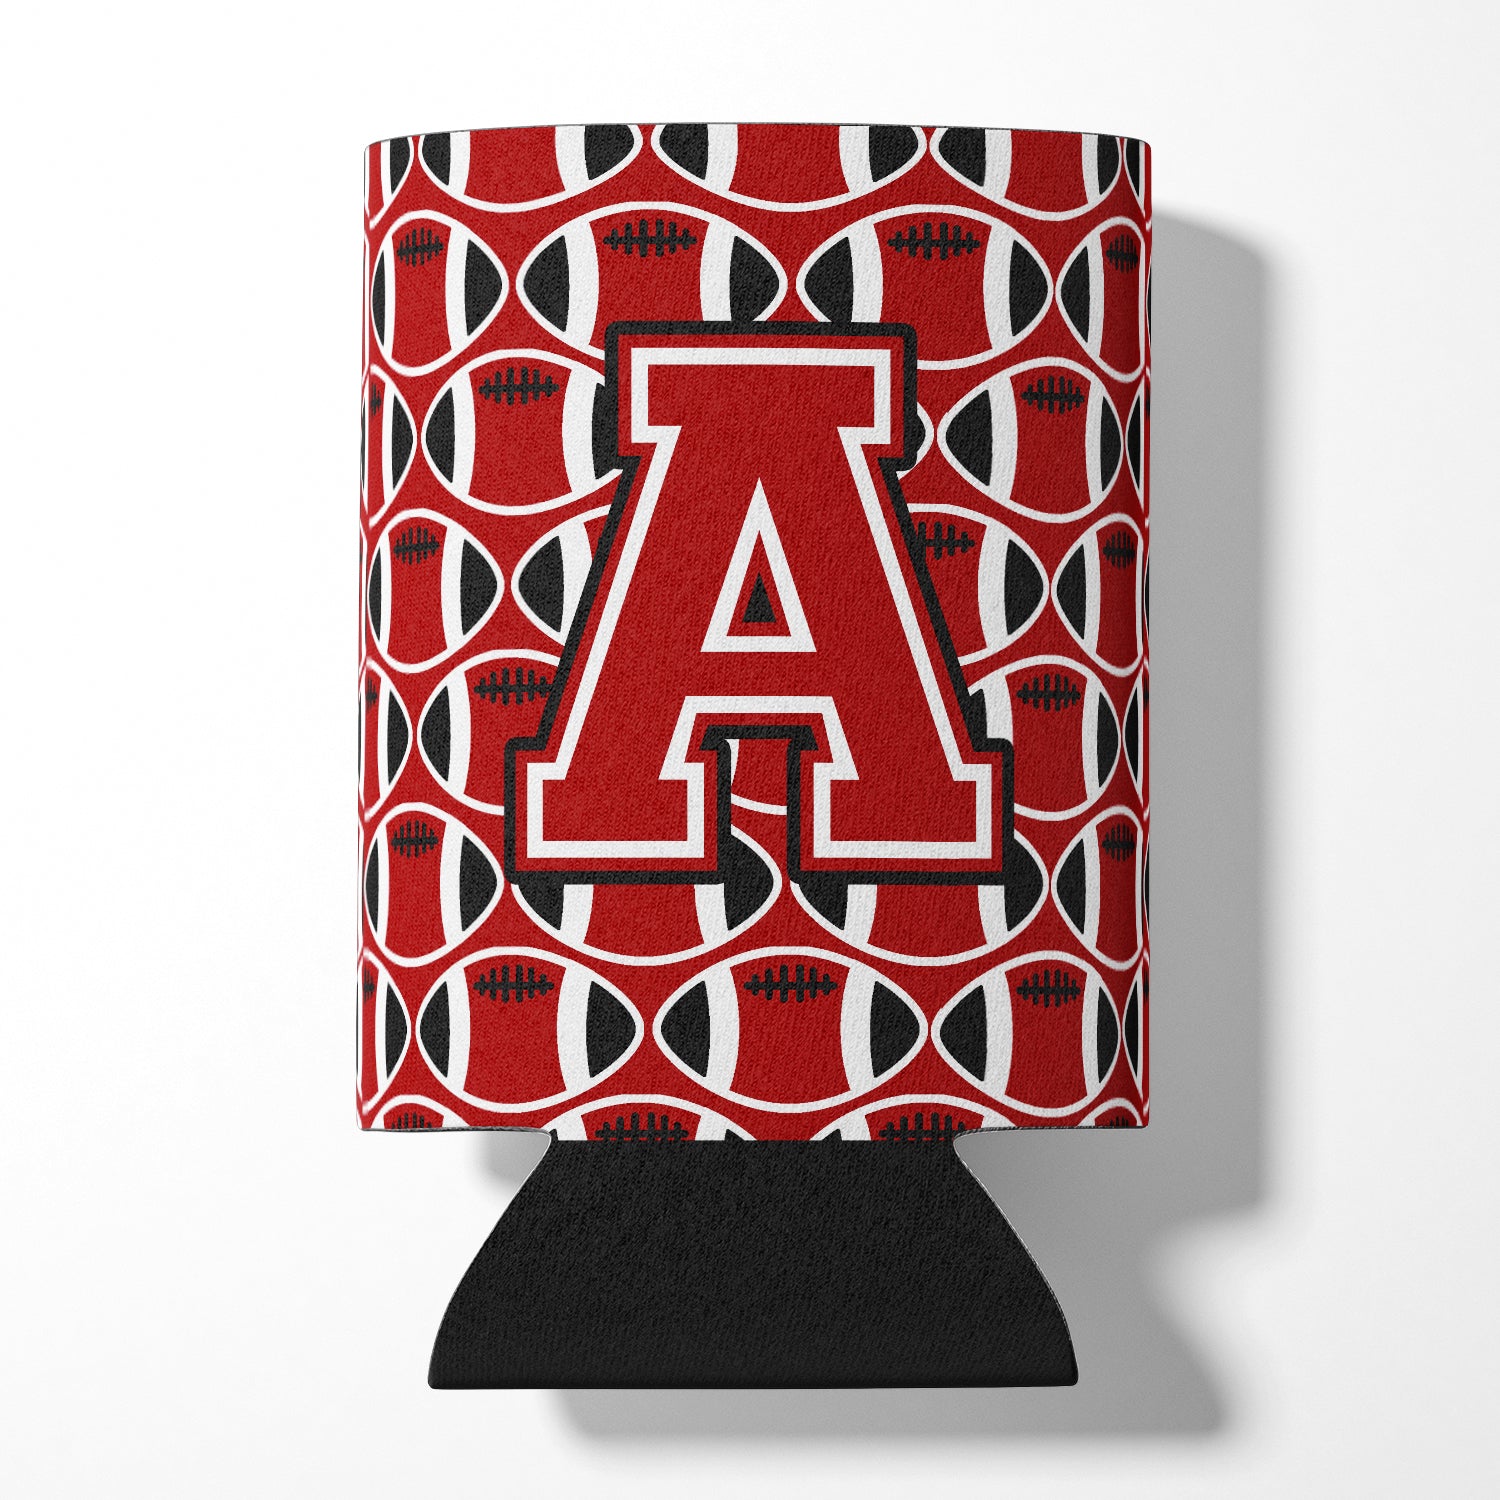 Letter A Football Red, Black and White Can or Bottle Hugger CJ1073-ACC.